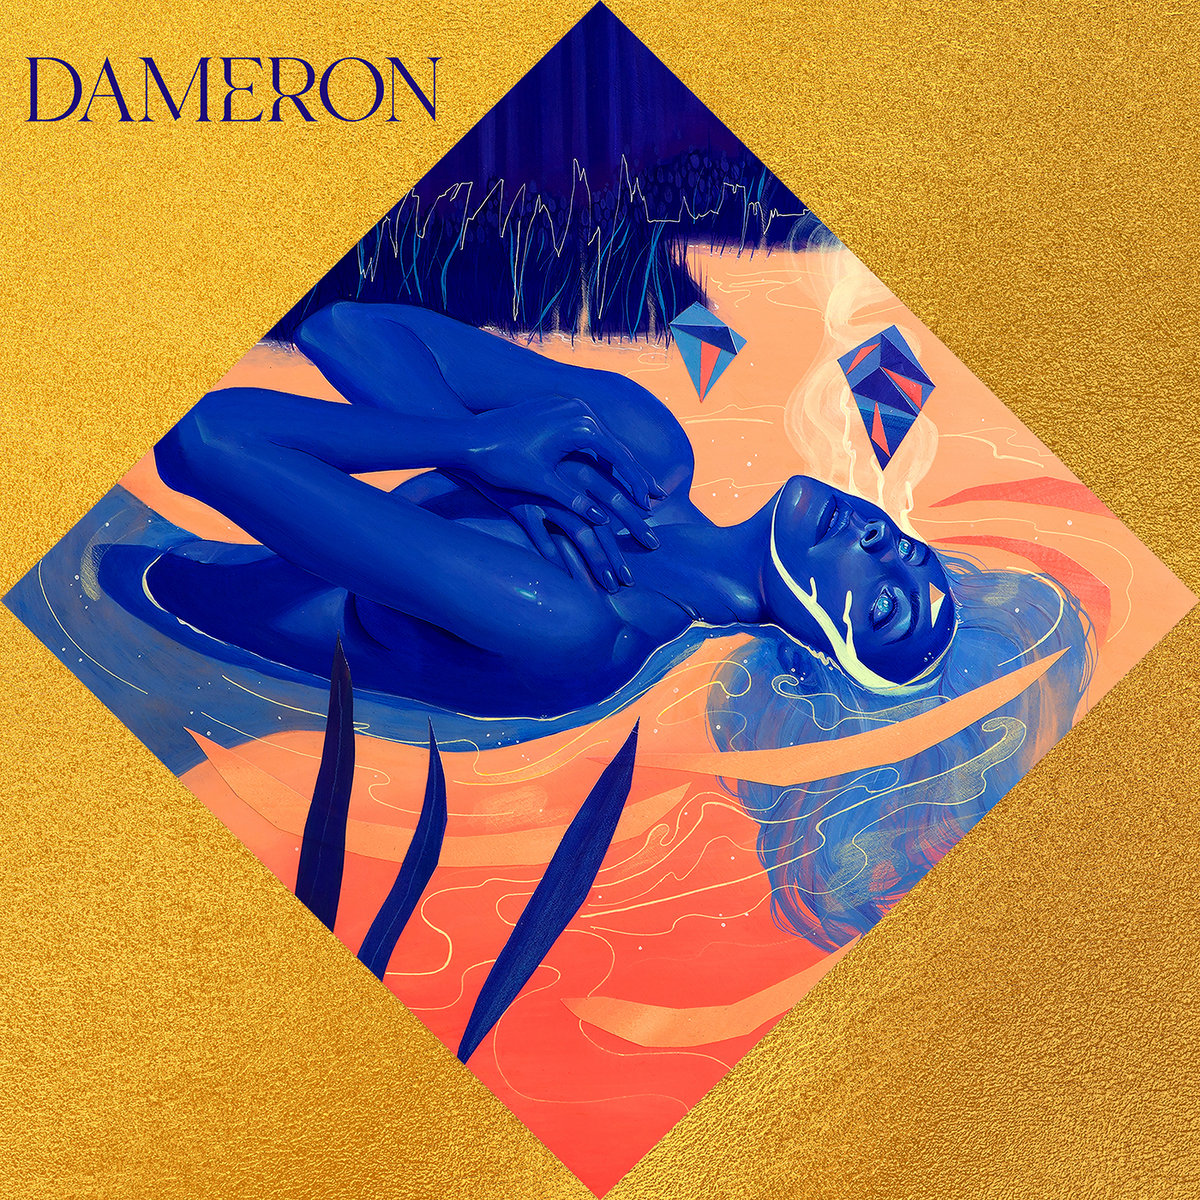 a2283440409 10 - Dameron mark stunning debut with ‘Stranded Vision’